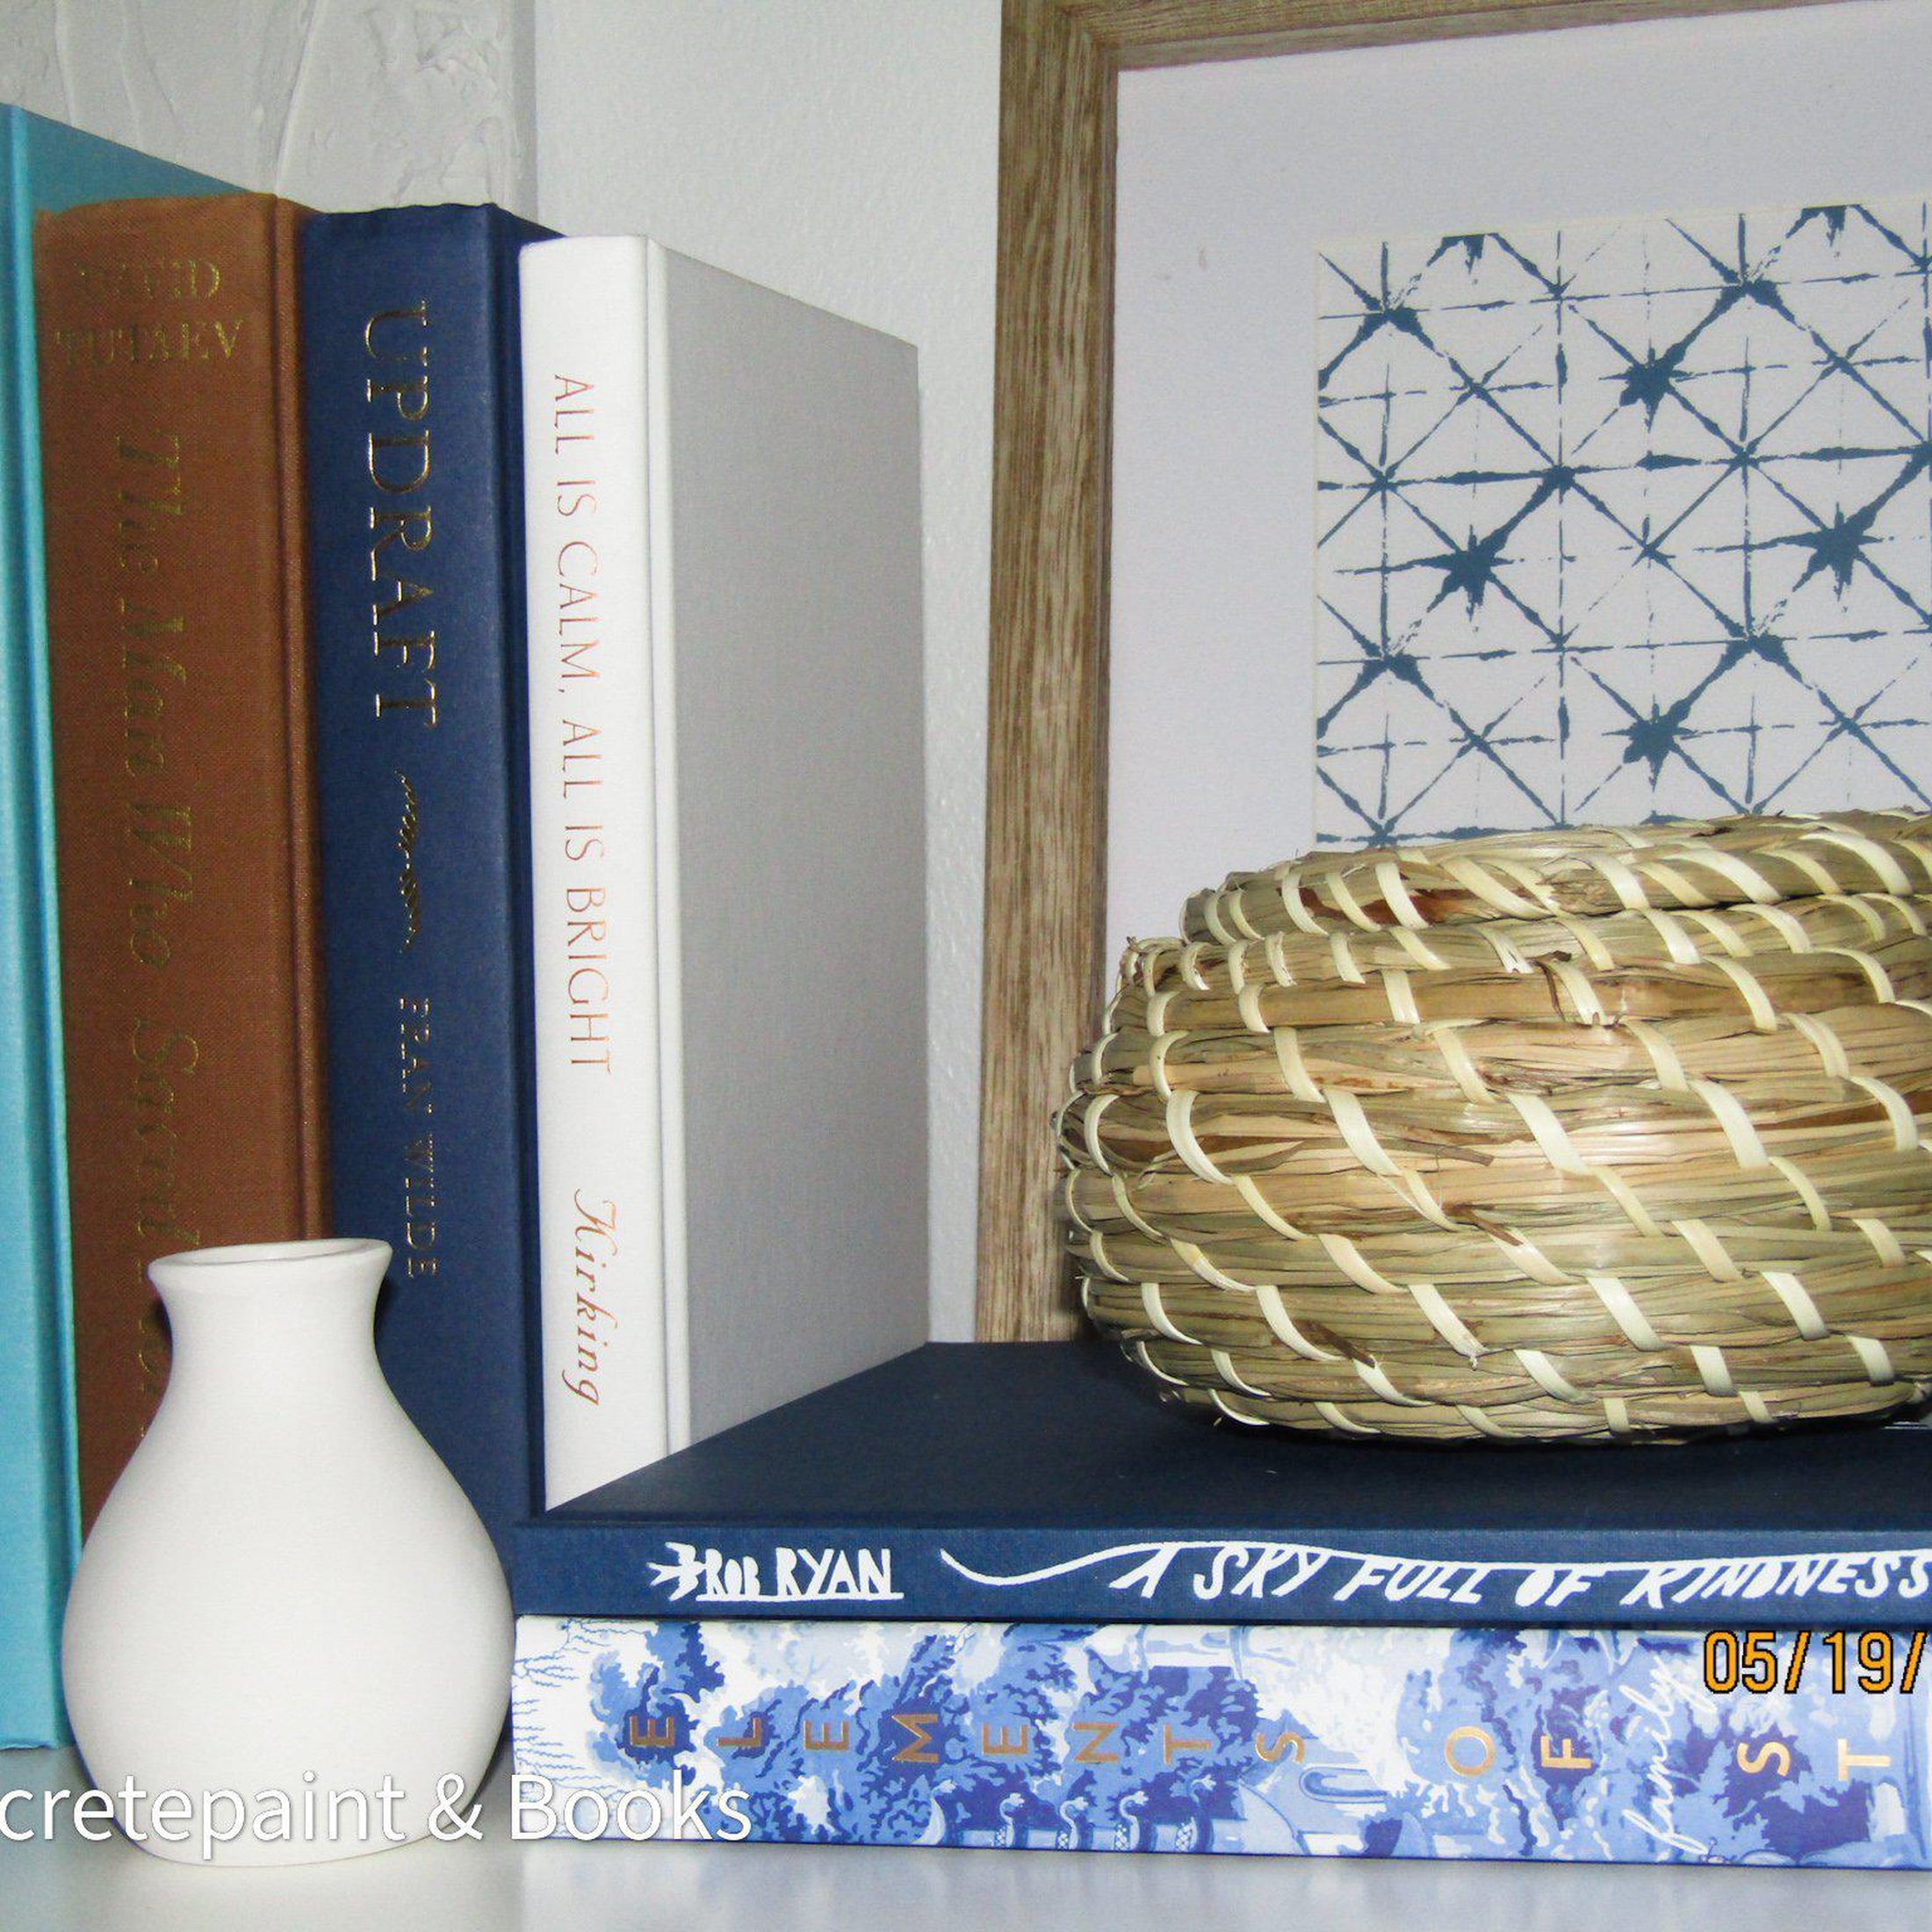 Real hardcover books with ikea seagrass basket and small white vase staged as home décor. Blue, white, green and brown hardcover books.